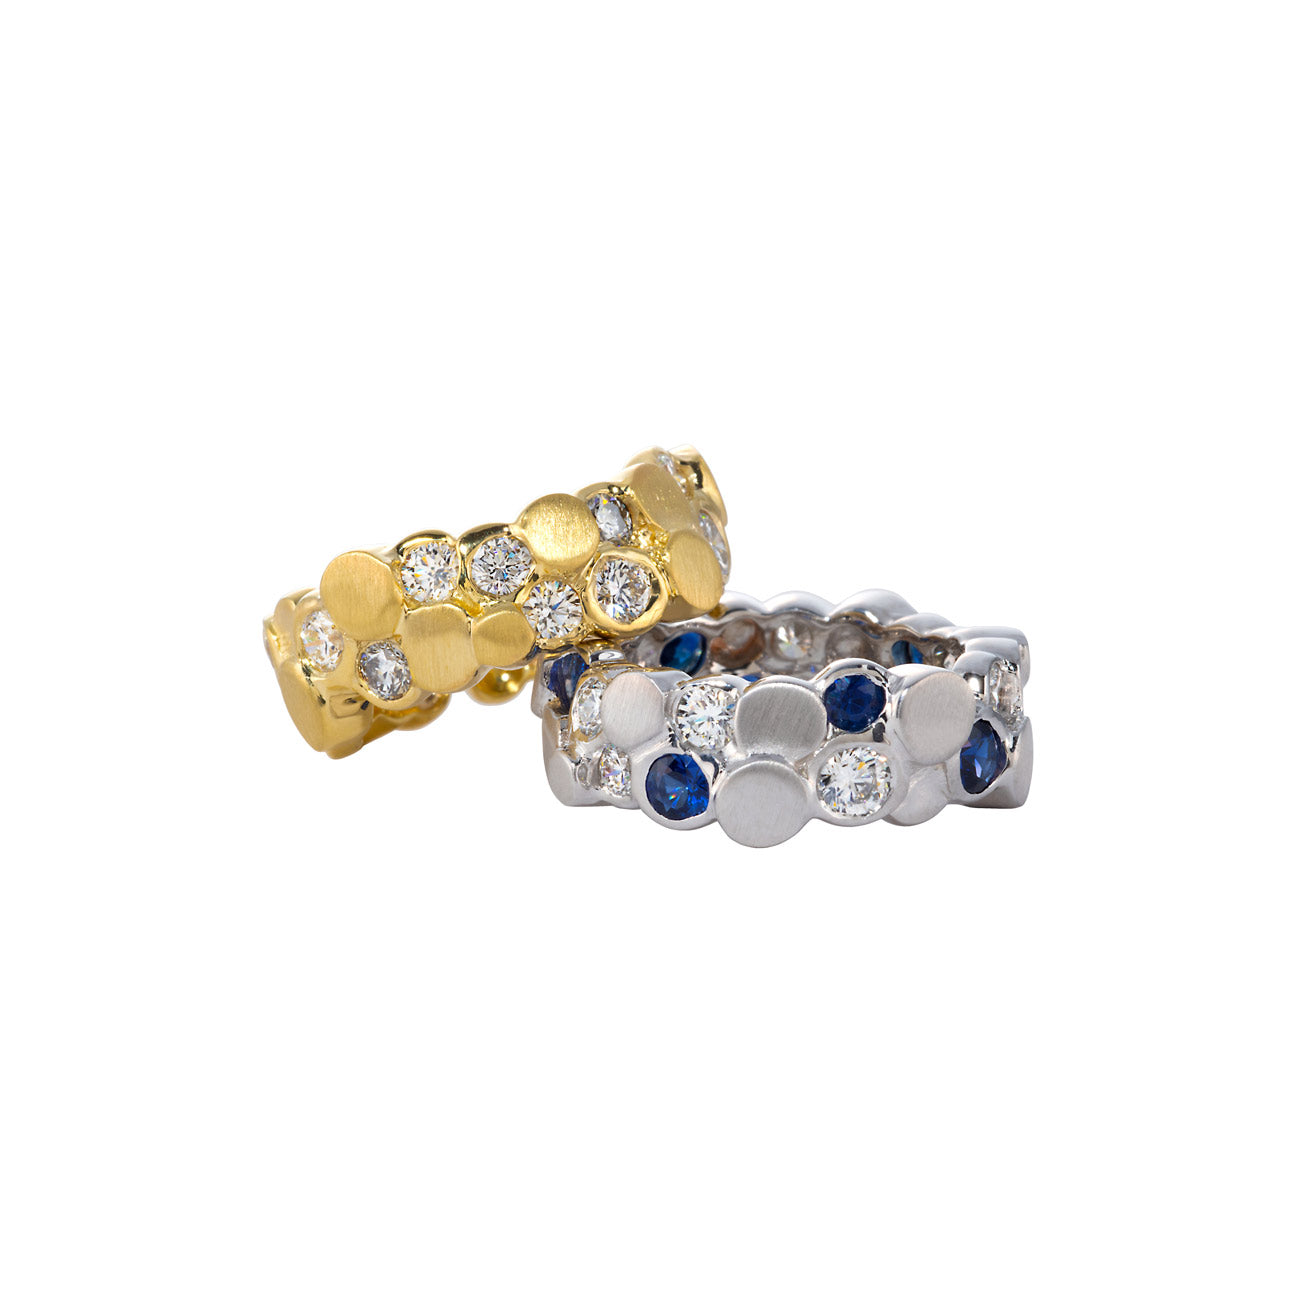 Gold and platinum bands laying together featuring diamonds and sapphires by chicago's best jeweler, Lester Lampert.